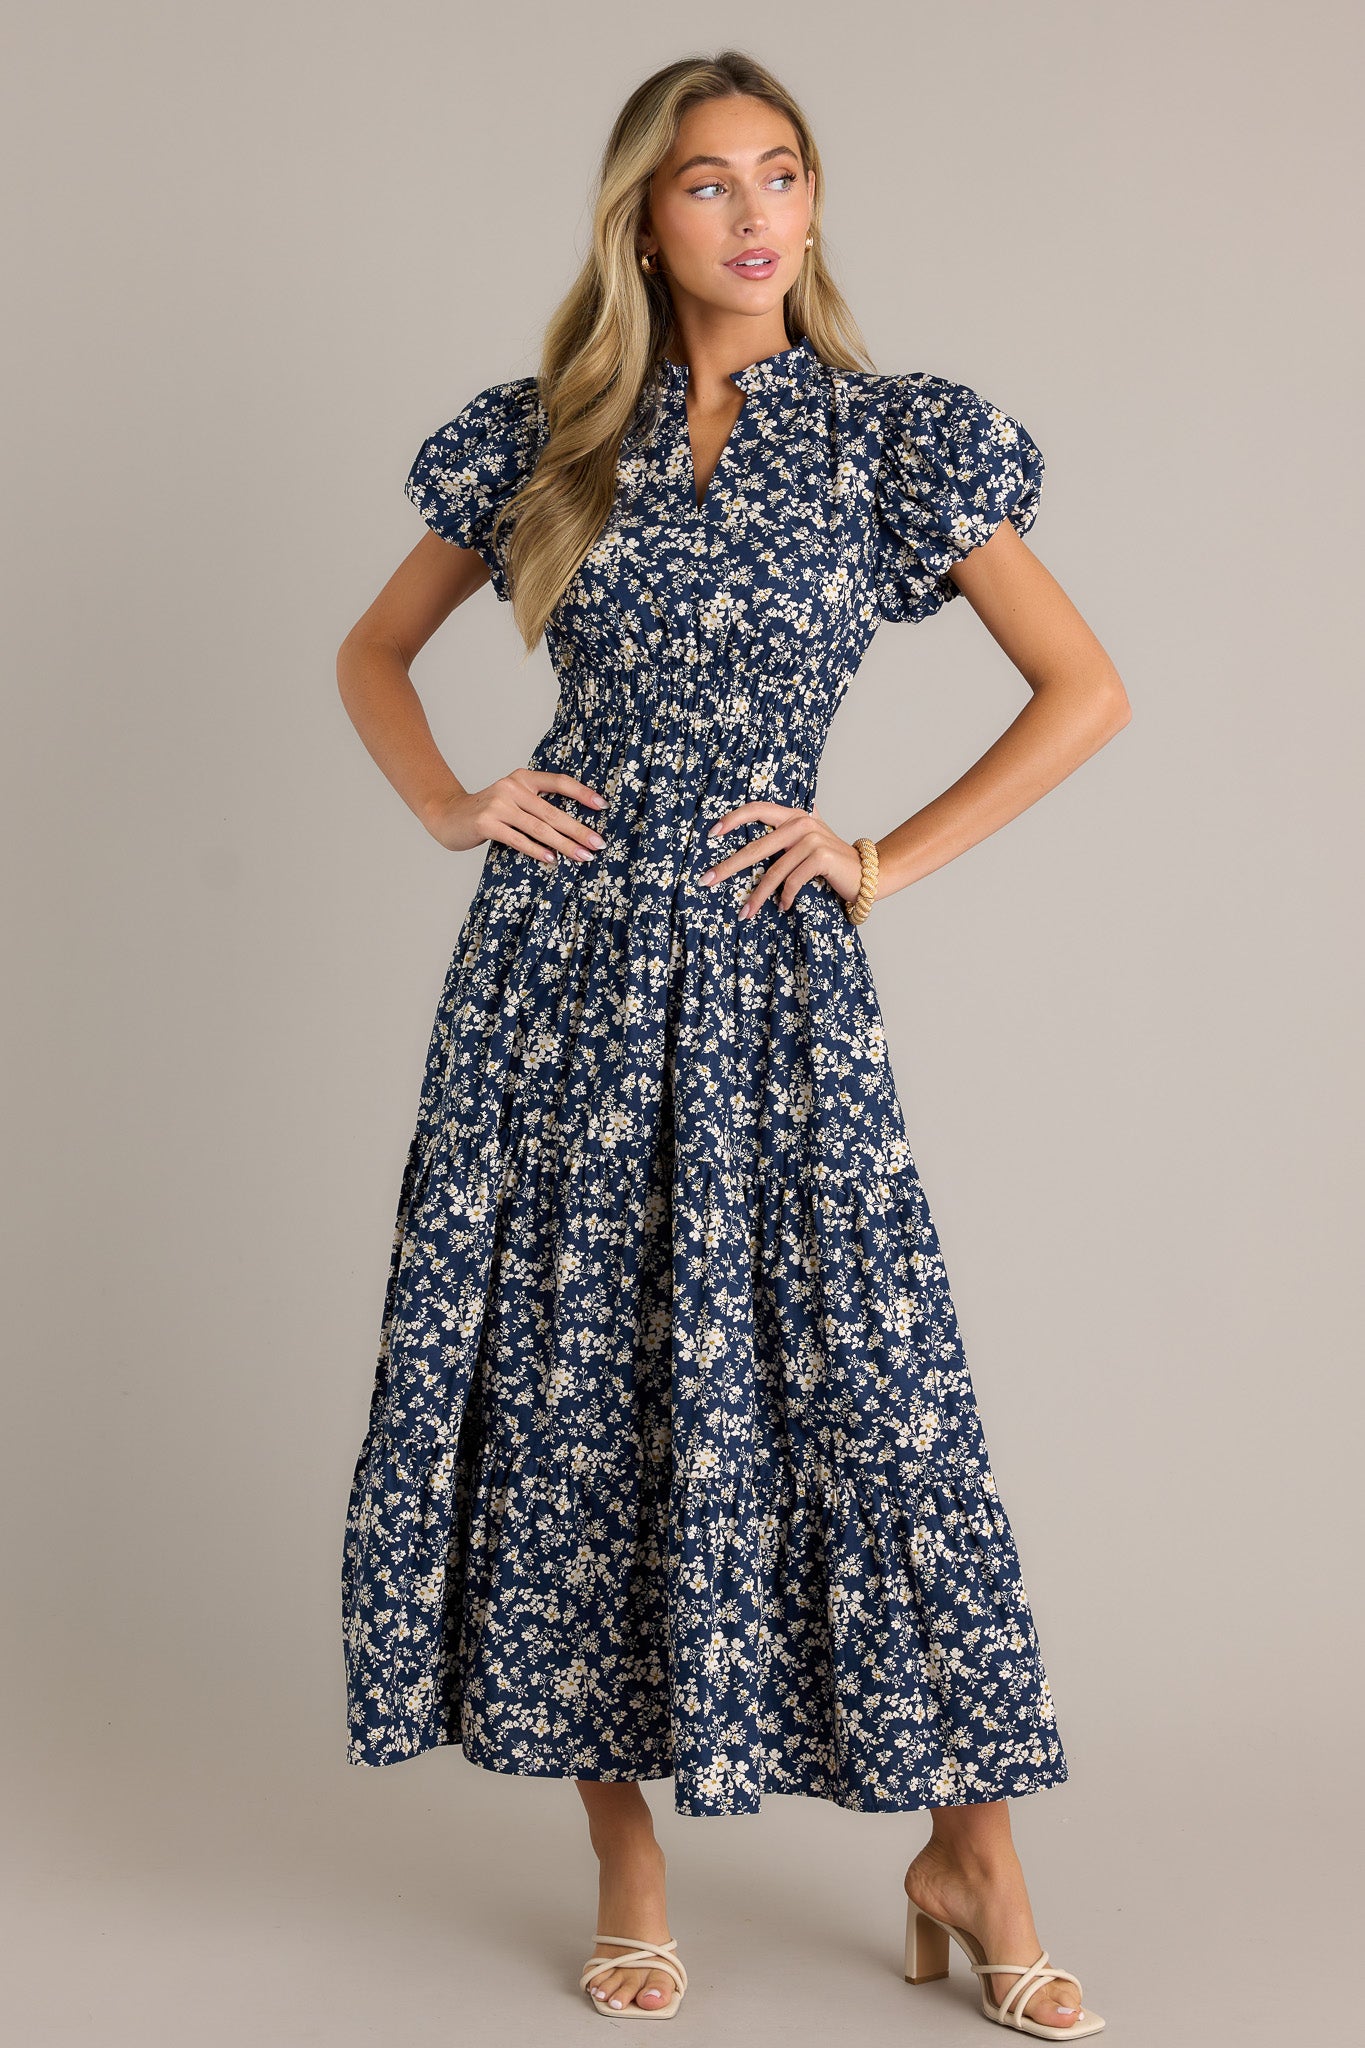 Front angled view of a navy floral dress featuring a v-neckline, a ruffle collar, an elastic waistband, a tiered design, short cuffed puff sleeves, and a flowing silhouette